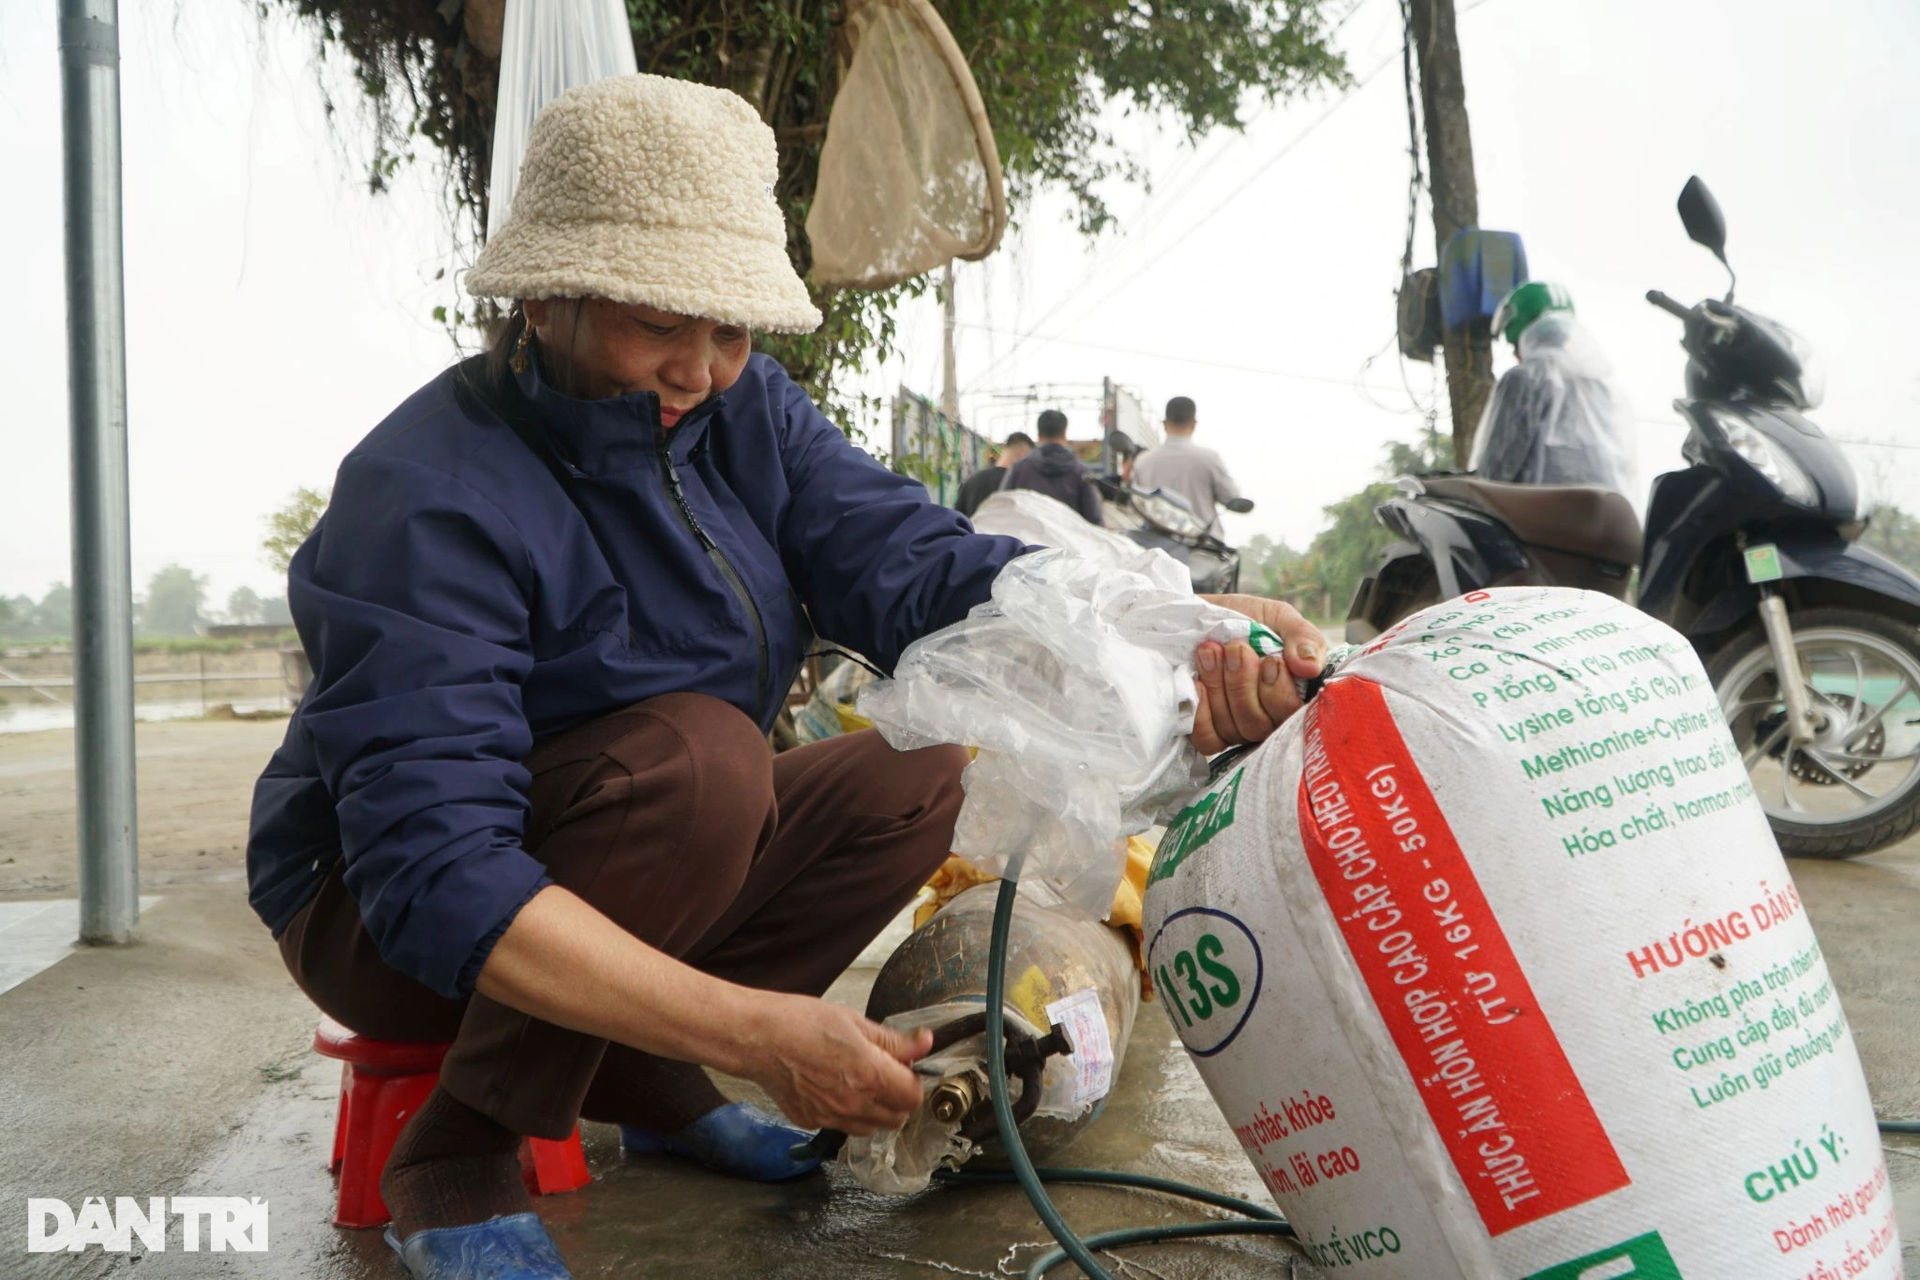 Dredging the lake to collect 3 tons of carp, earning hundreds of millions before Mr. Tao returns to heaven - October 10